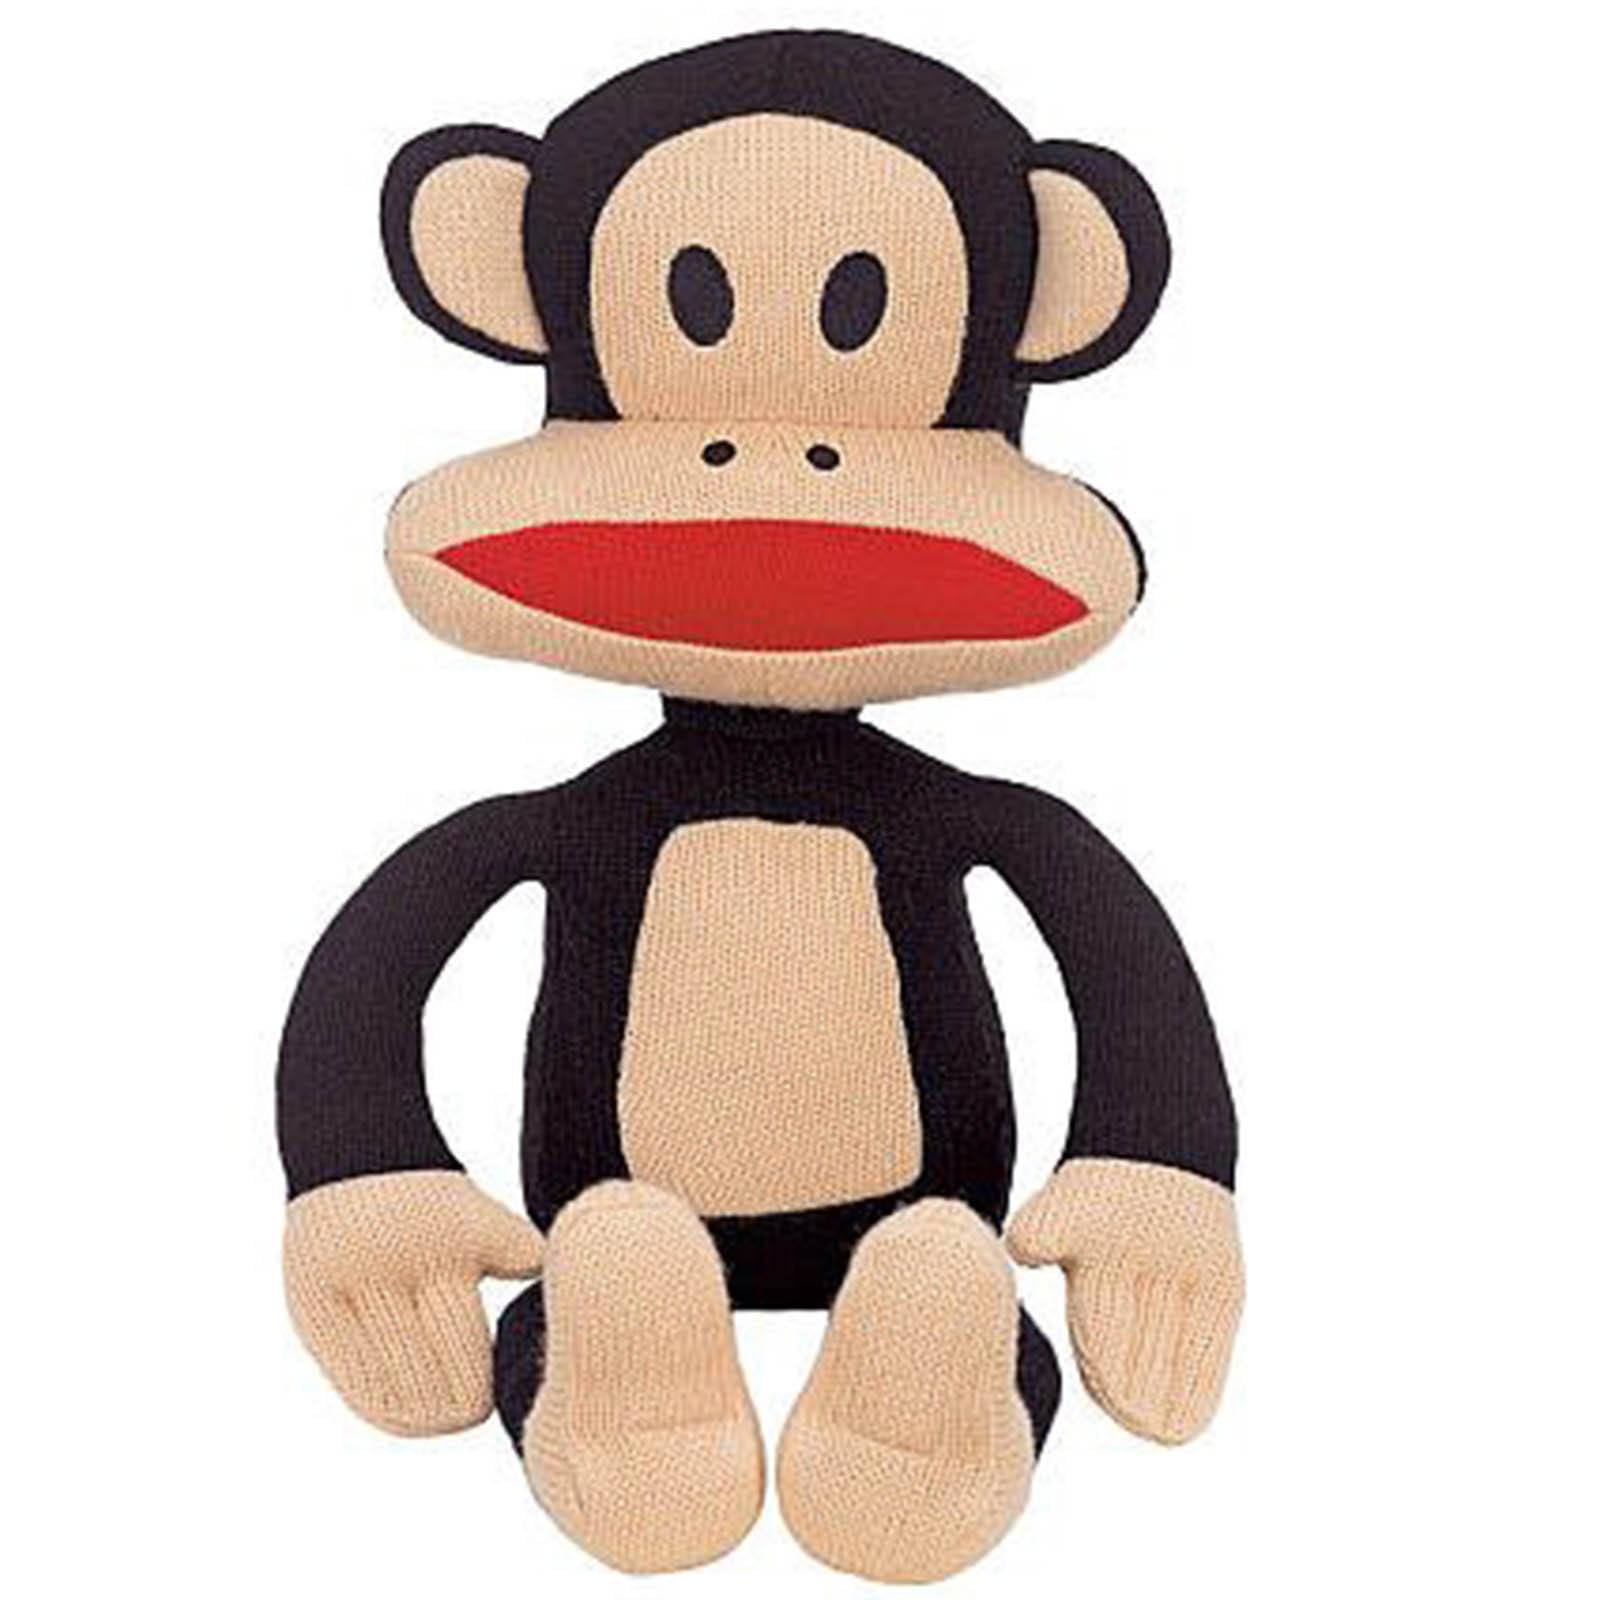 Paul Frank Julius Knitted Pink Sock Monkey Soft Plush Doll Toy For Baby Kids